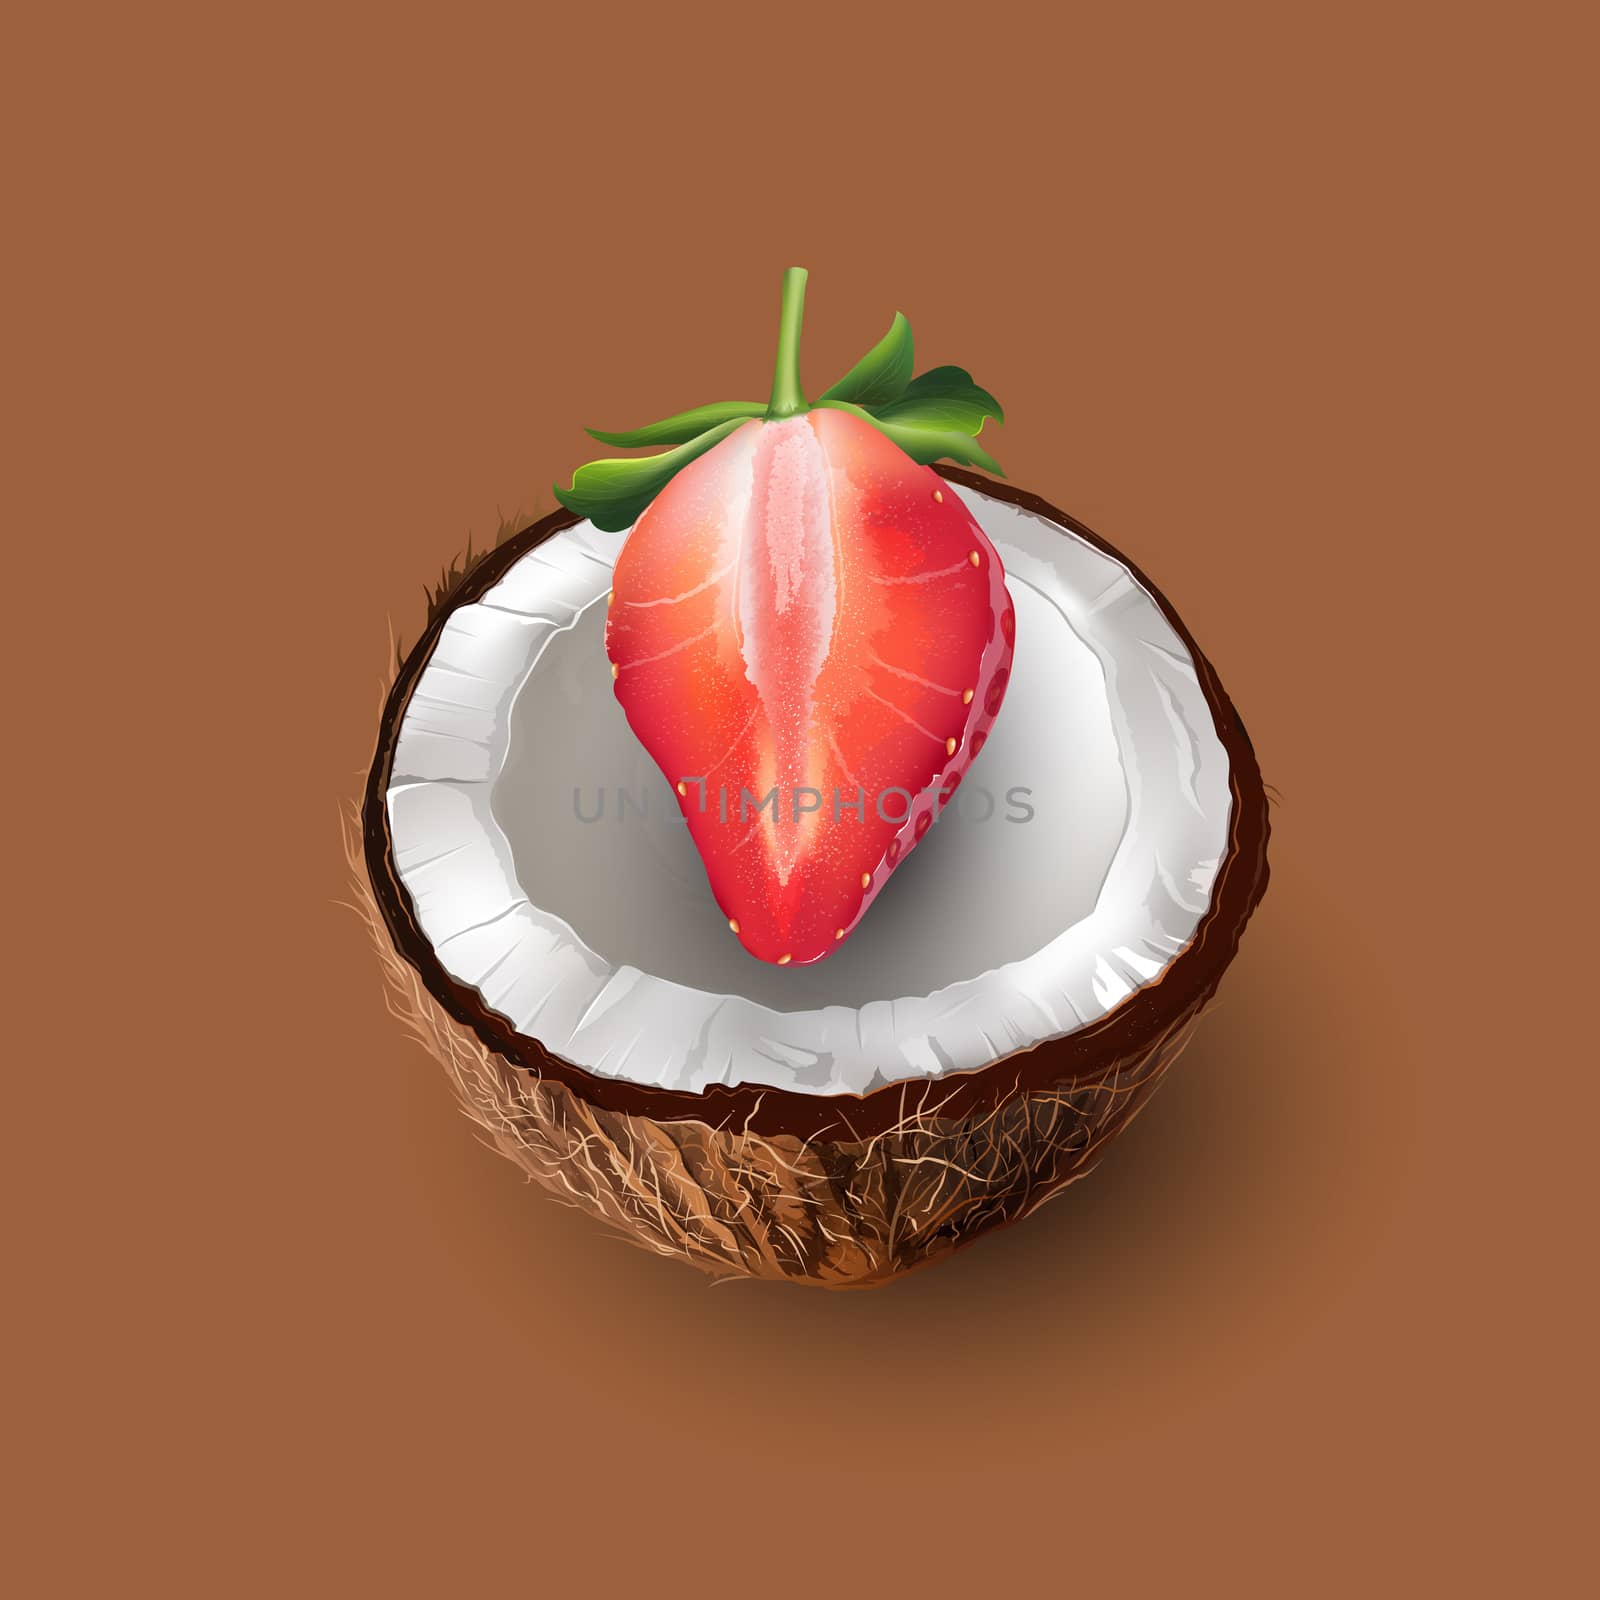 Coconut and strawberry on a chocolate background.